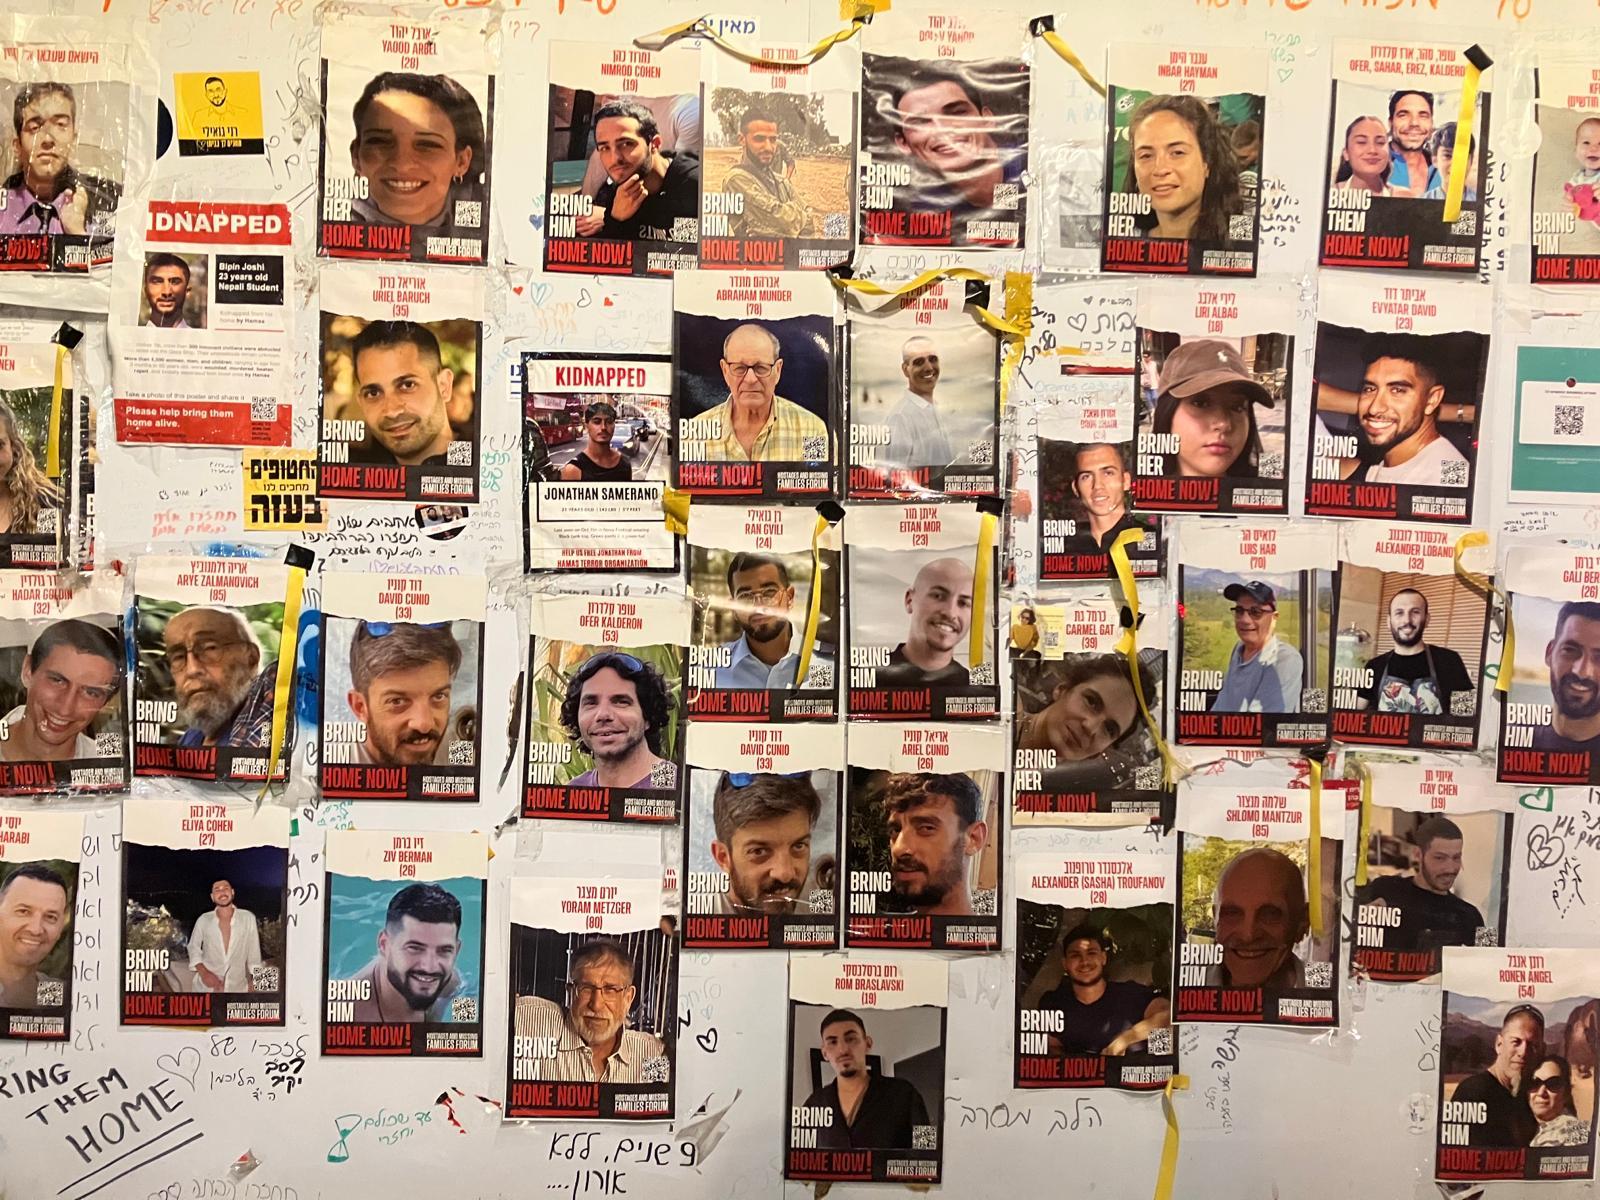 Photos of Israeli hostages kidnapped by Hamas on Oct. 7 are plastered in 